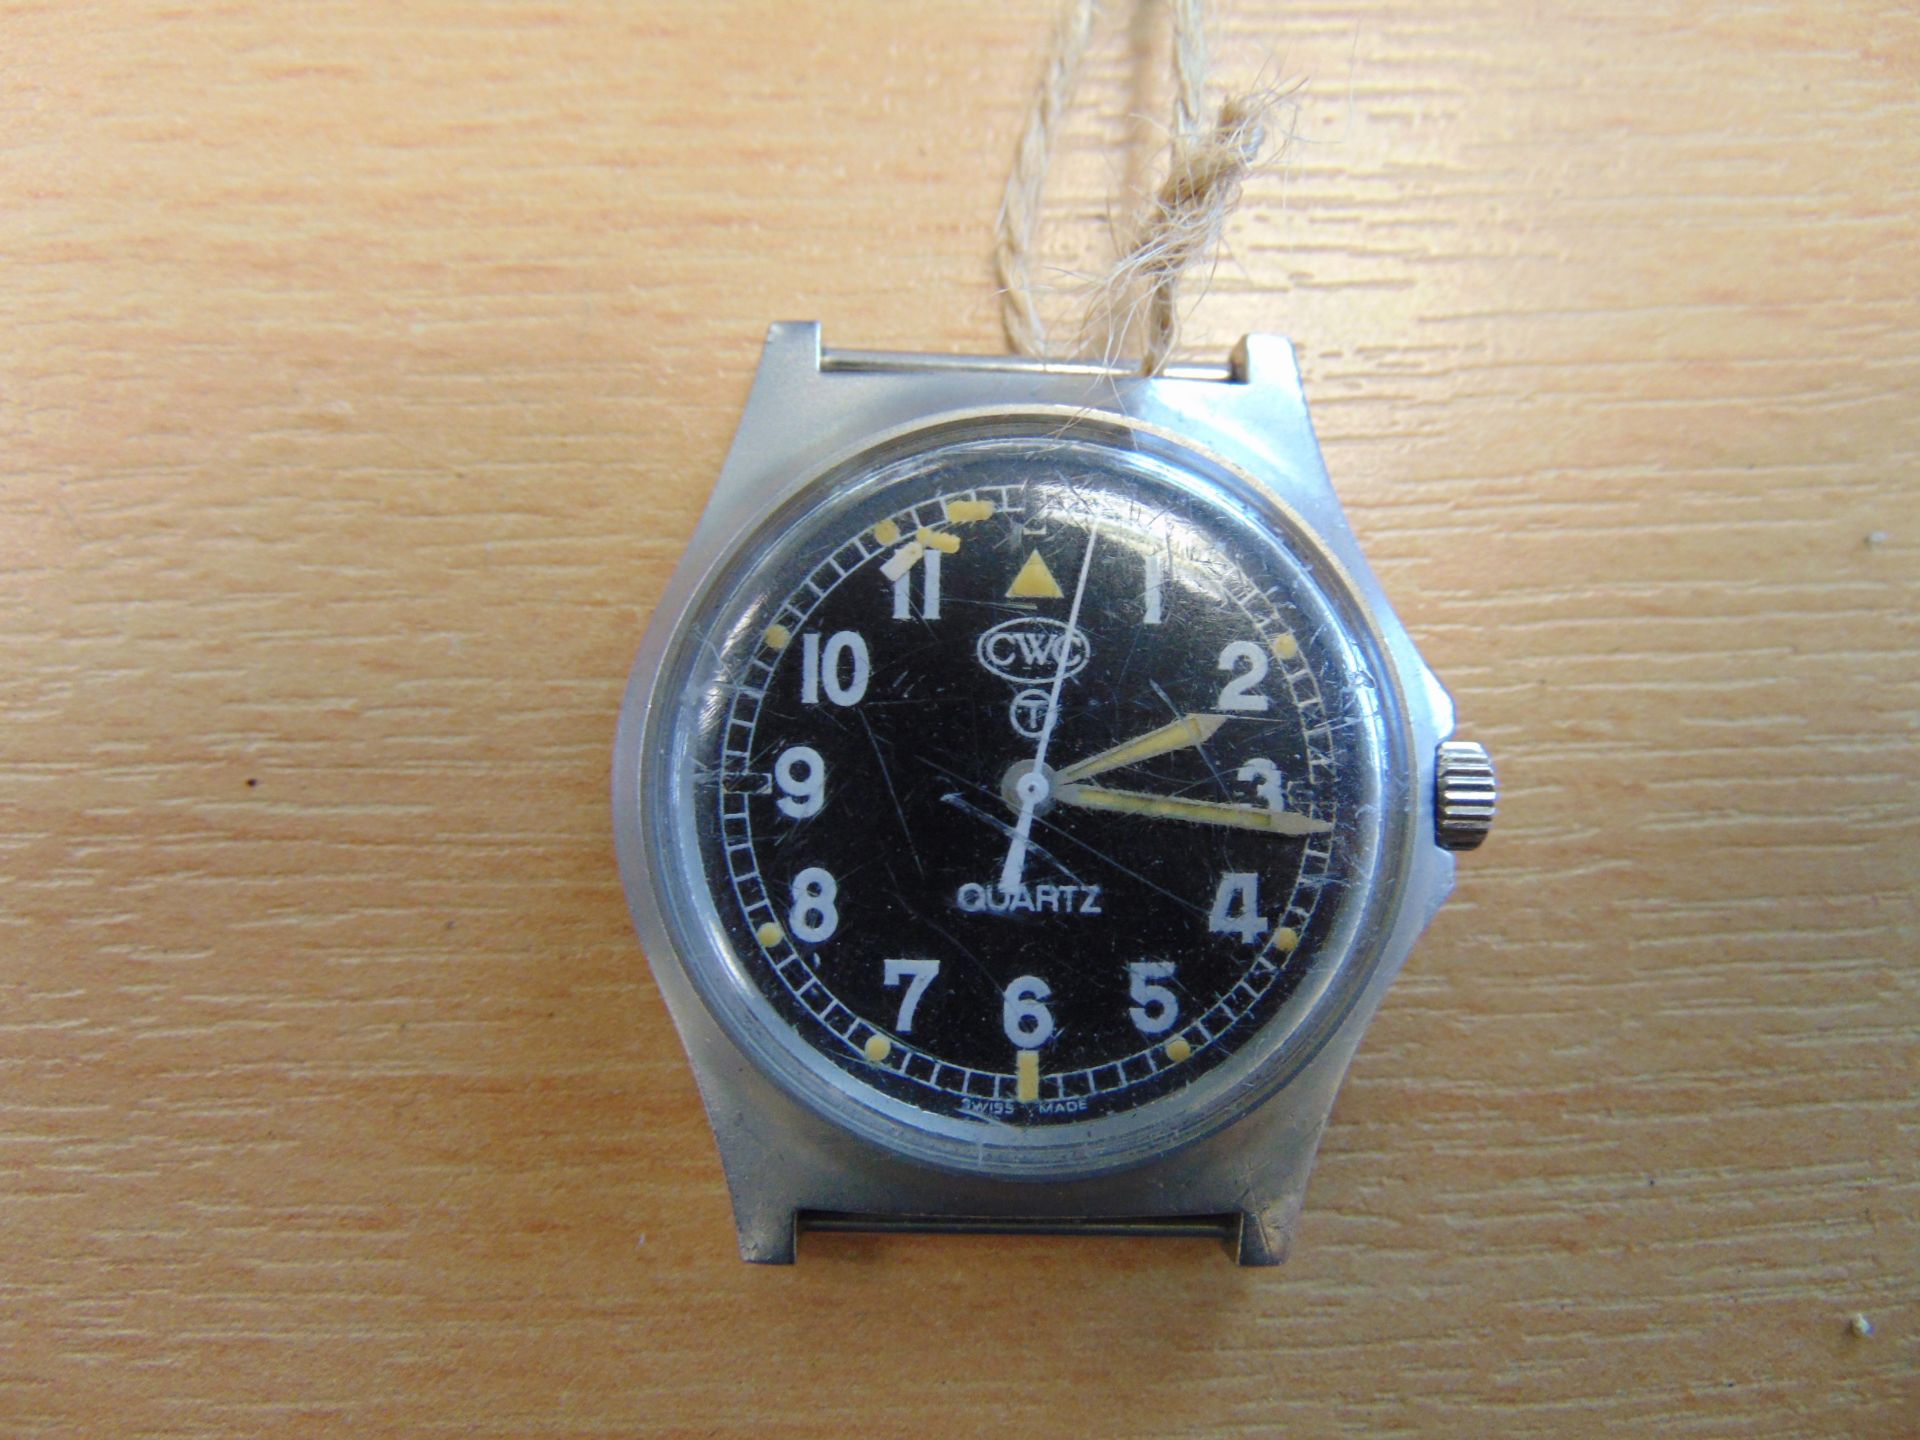 CWC (Cabot Watch Co Switzerland) British Army W10 Service Watch Water Resistant to 5ATM - Image 2 of 3